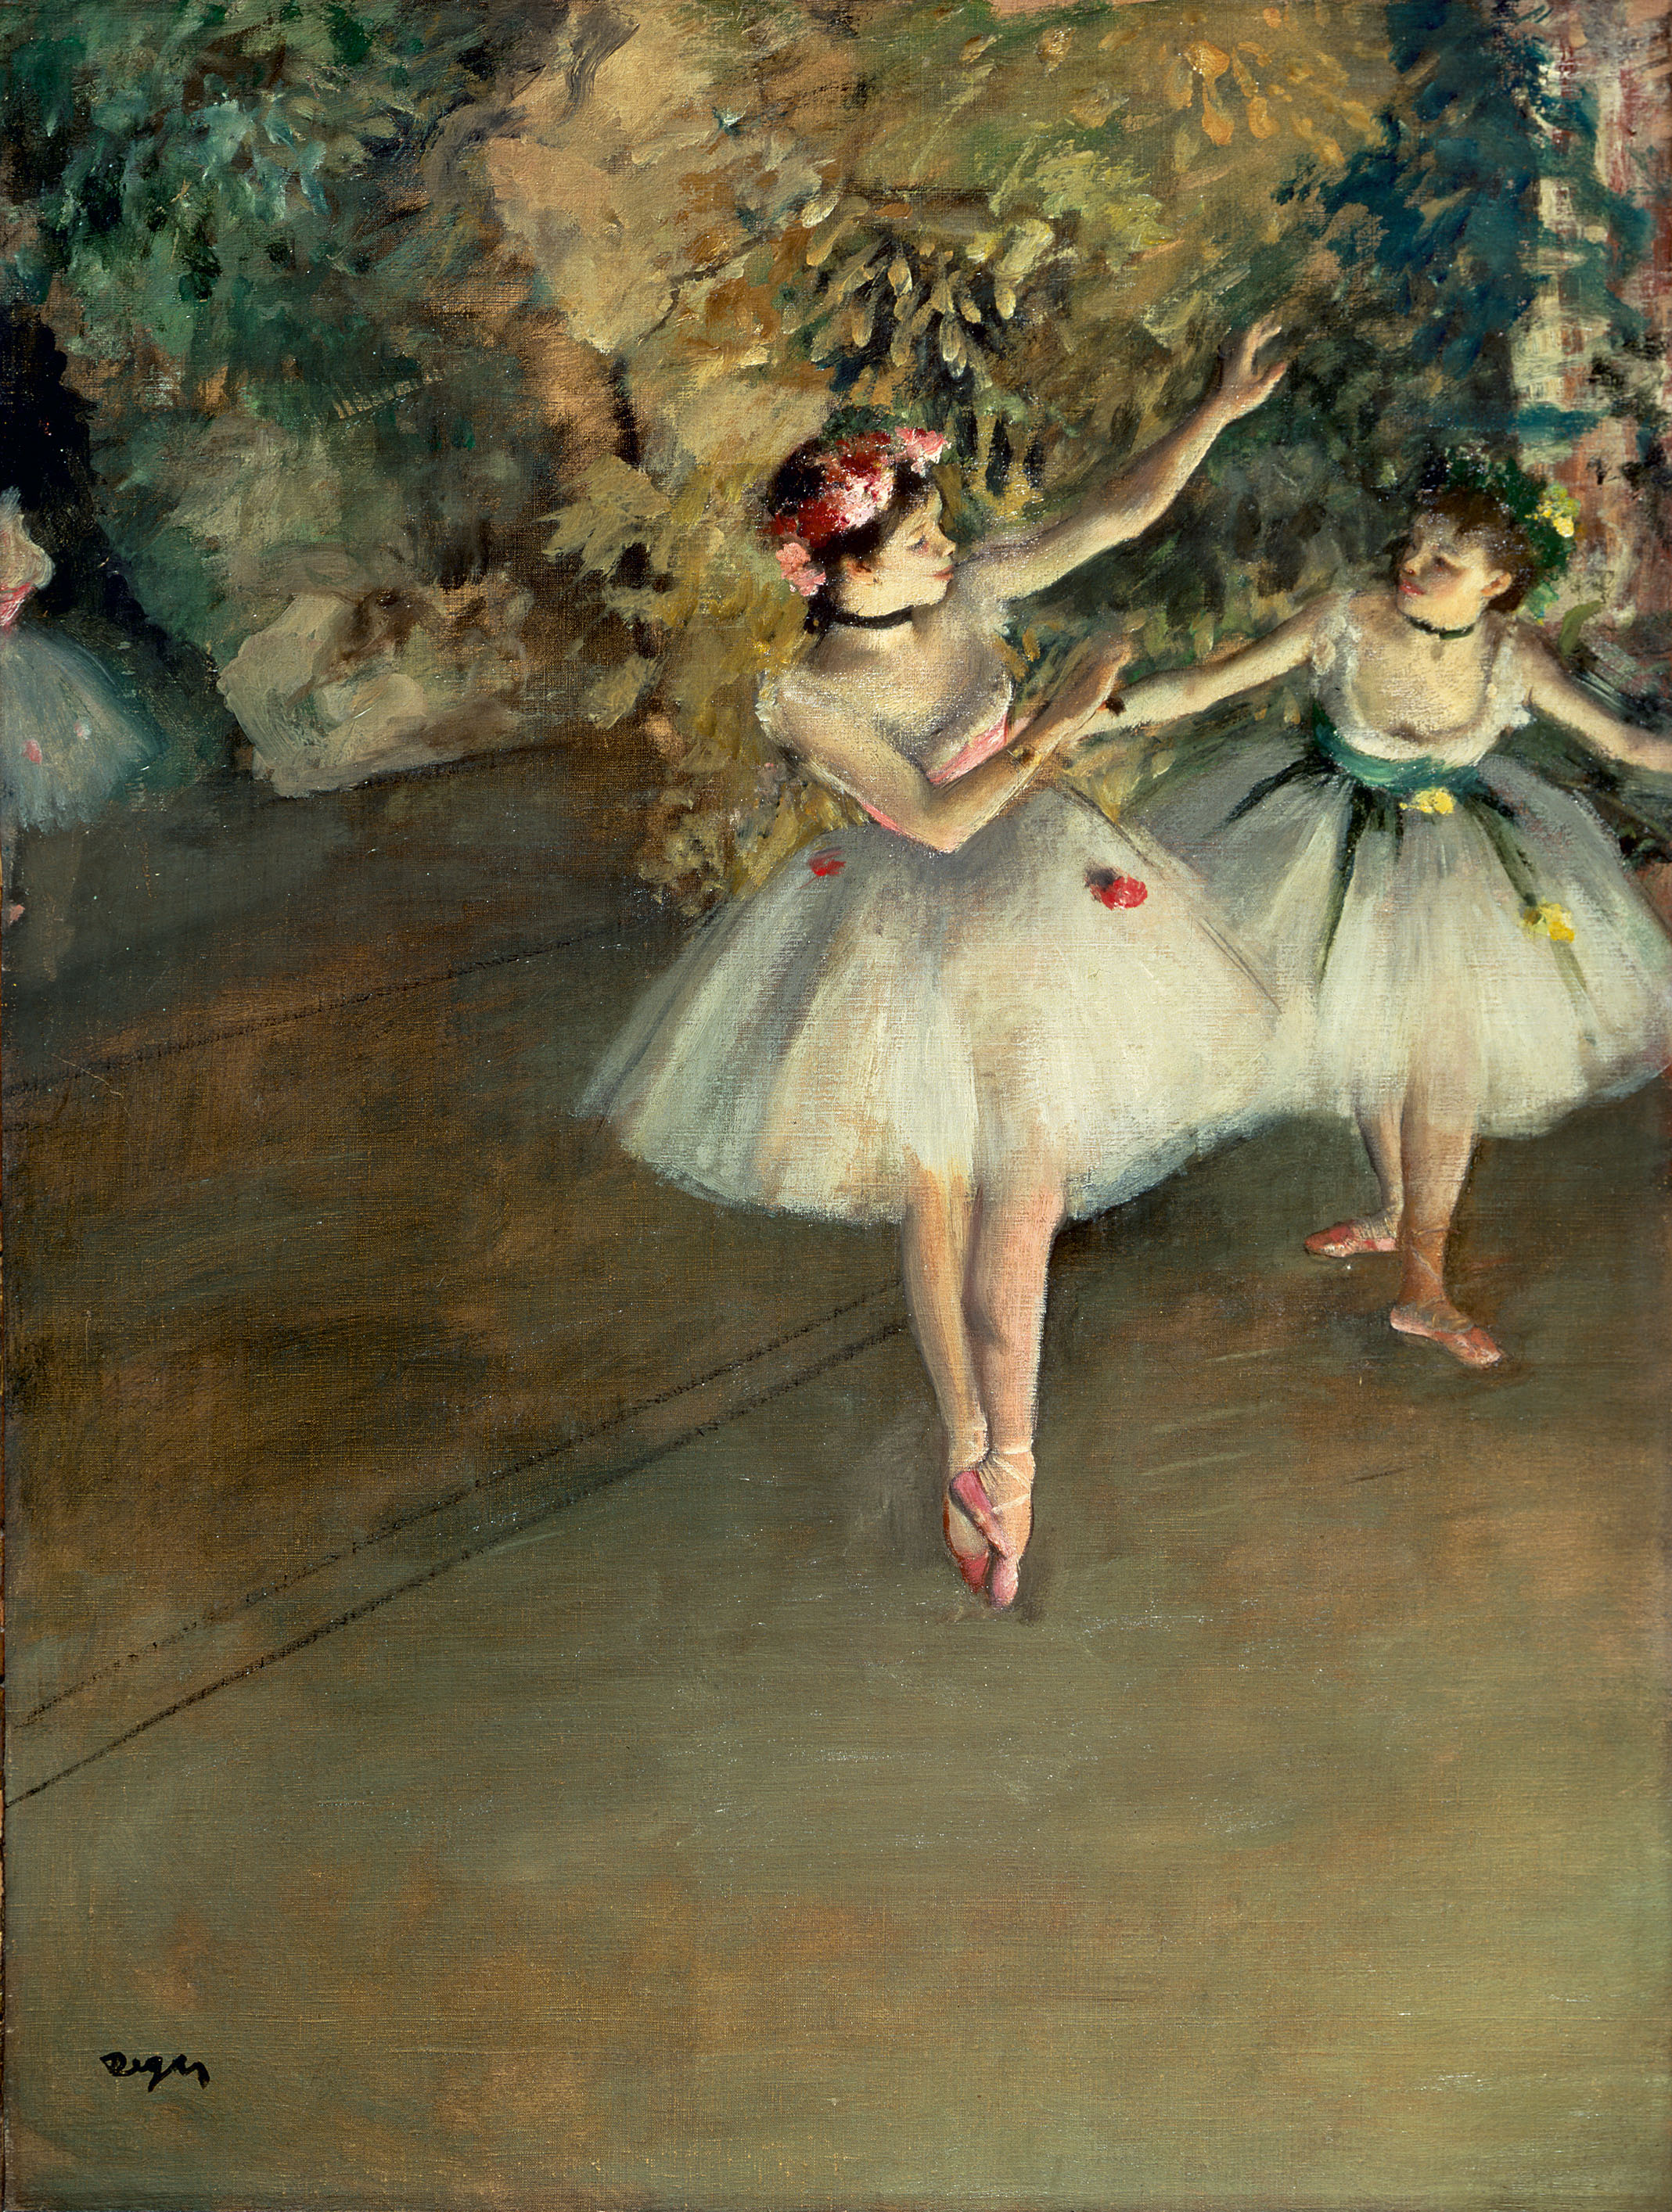 Edgar Degas - Two Dancers on a Stage, 1874 | Trivium Art History